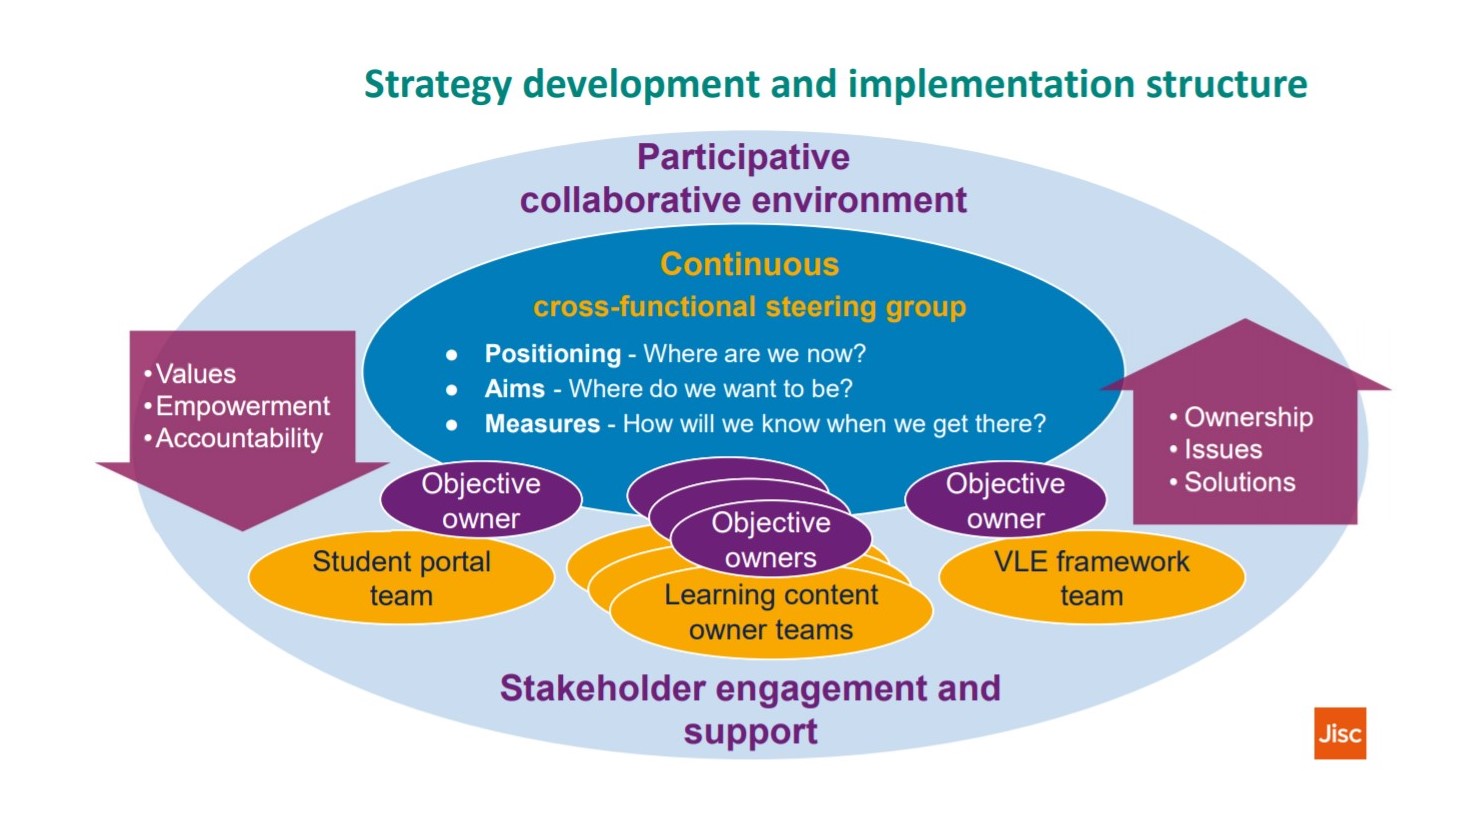 Image description: image shows a strategy development and implementation structure. All the processes sit within an environment of participative collaboration and stakeholder engagement and support. At the centre is the continuous cross-functional steering group, which asks: Where are we now? Where do we want to be? How will we know when we get there? Emerging from this group are owners of specific objectives who appoint their implementation teams. Top-down values, empowerment and accountability are provided by the steering group and objective owners. Bottom-up issues, solutions and process ownership are provided by the implementation team members.